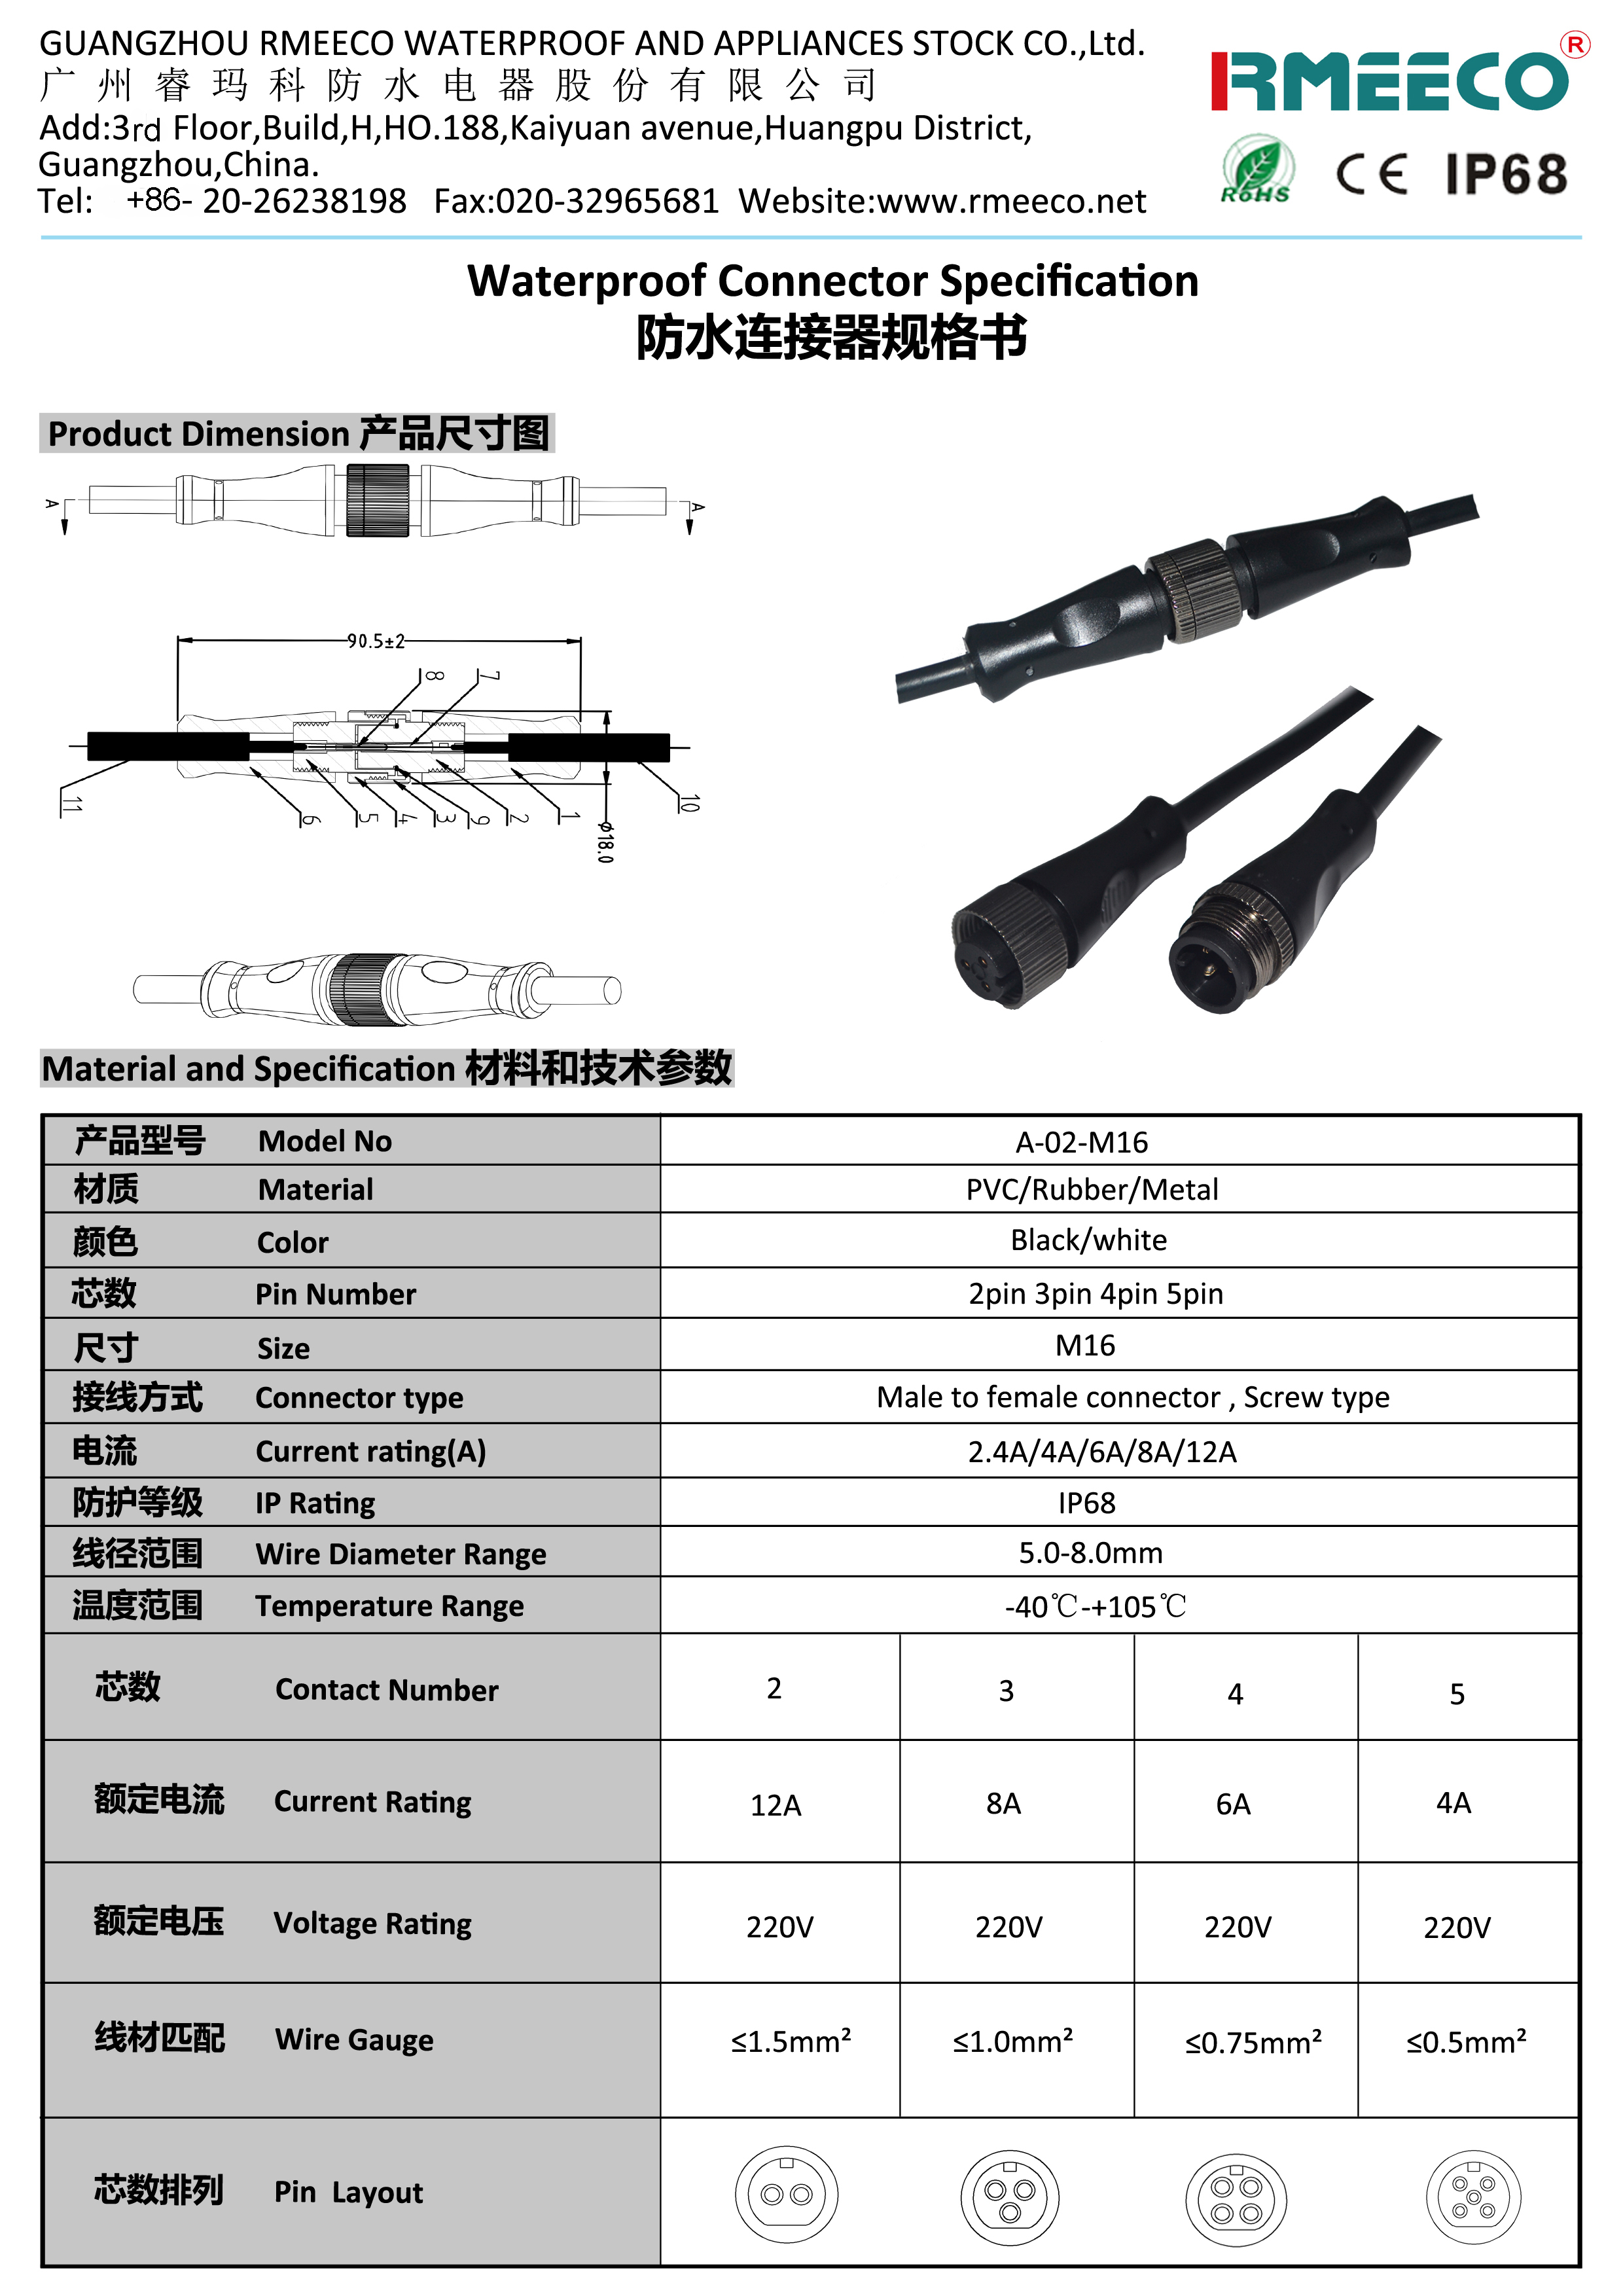 IP68 M12 Over Injection Molded Cable Connector 2 3 4 5 6 Pin Waterproof Cable Connector Conduit Circuit Element